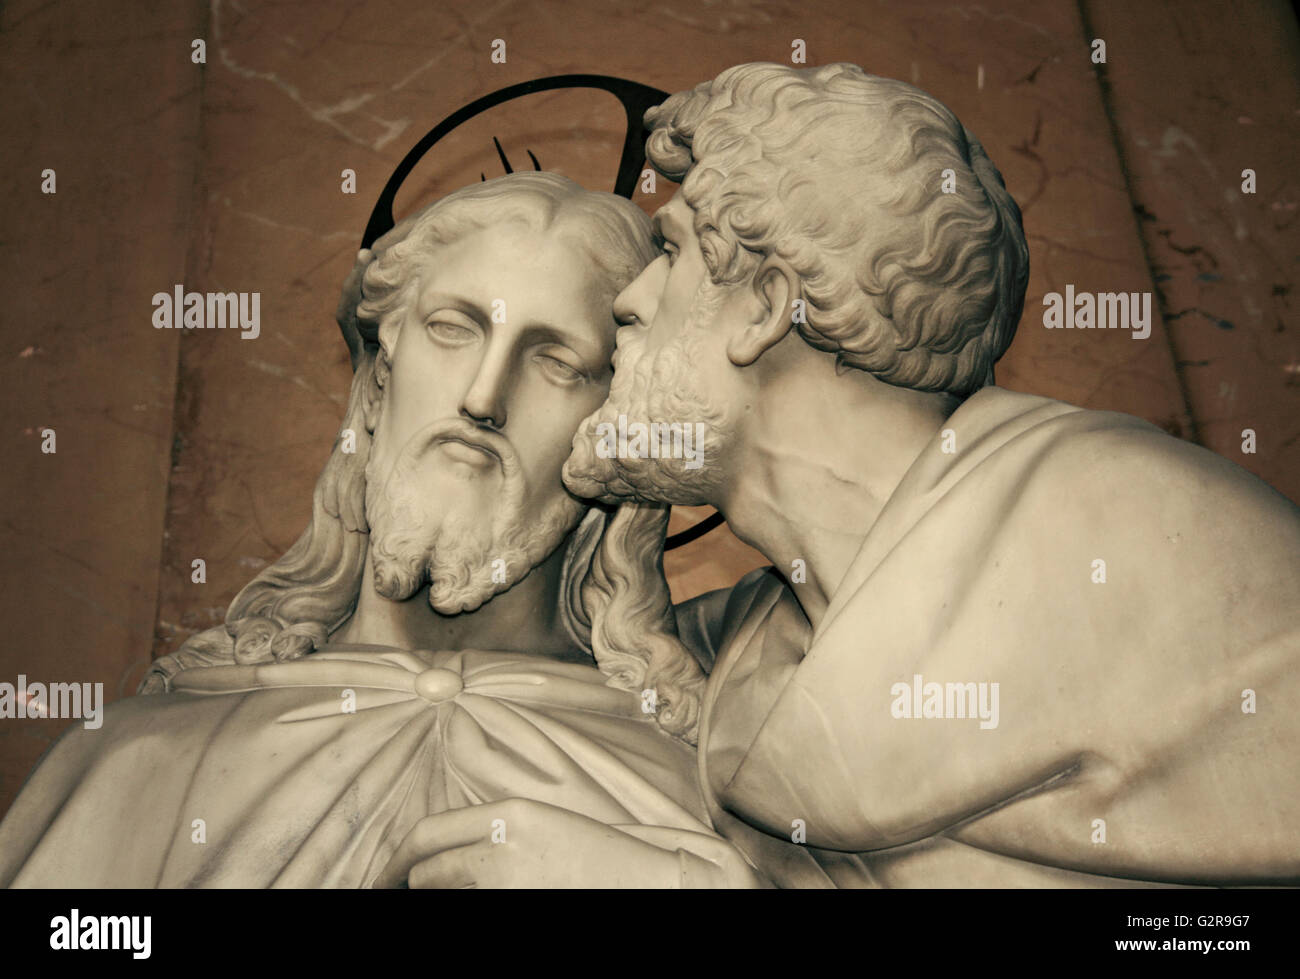 Kiss of Judas, marble statue of Jesus and Judas, next to the Scala Sancta in the Lateran Palace, Rome, Italy Stock Photo